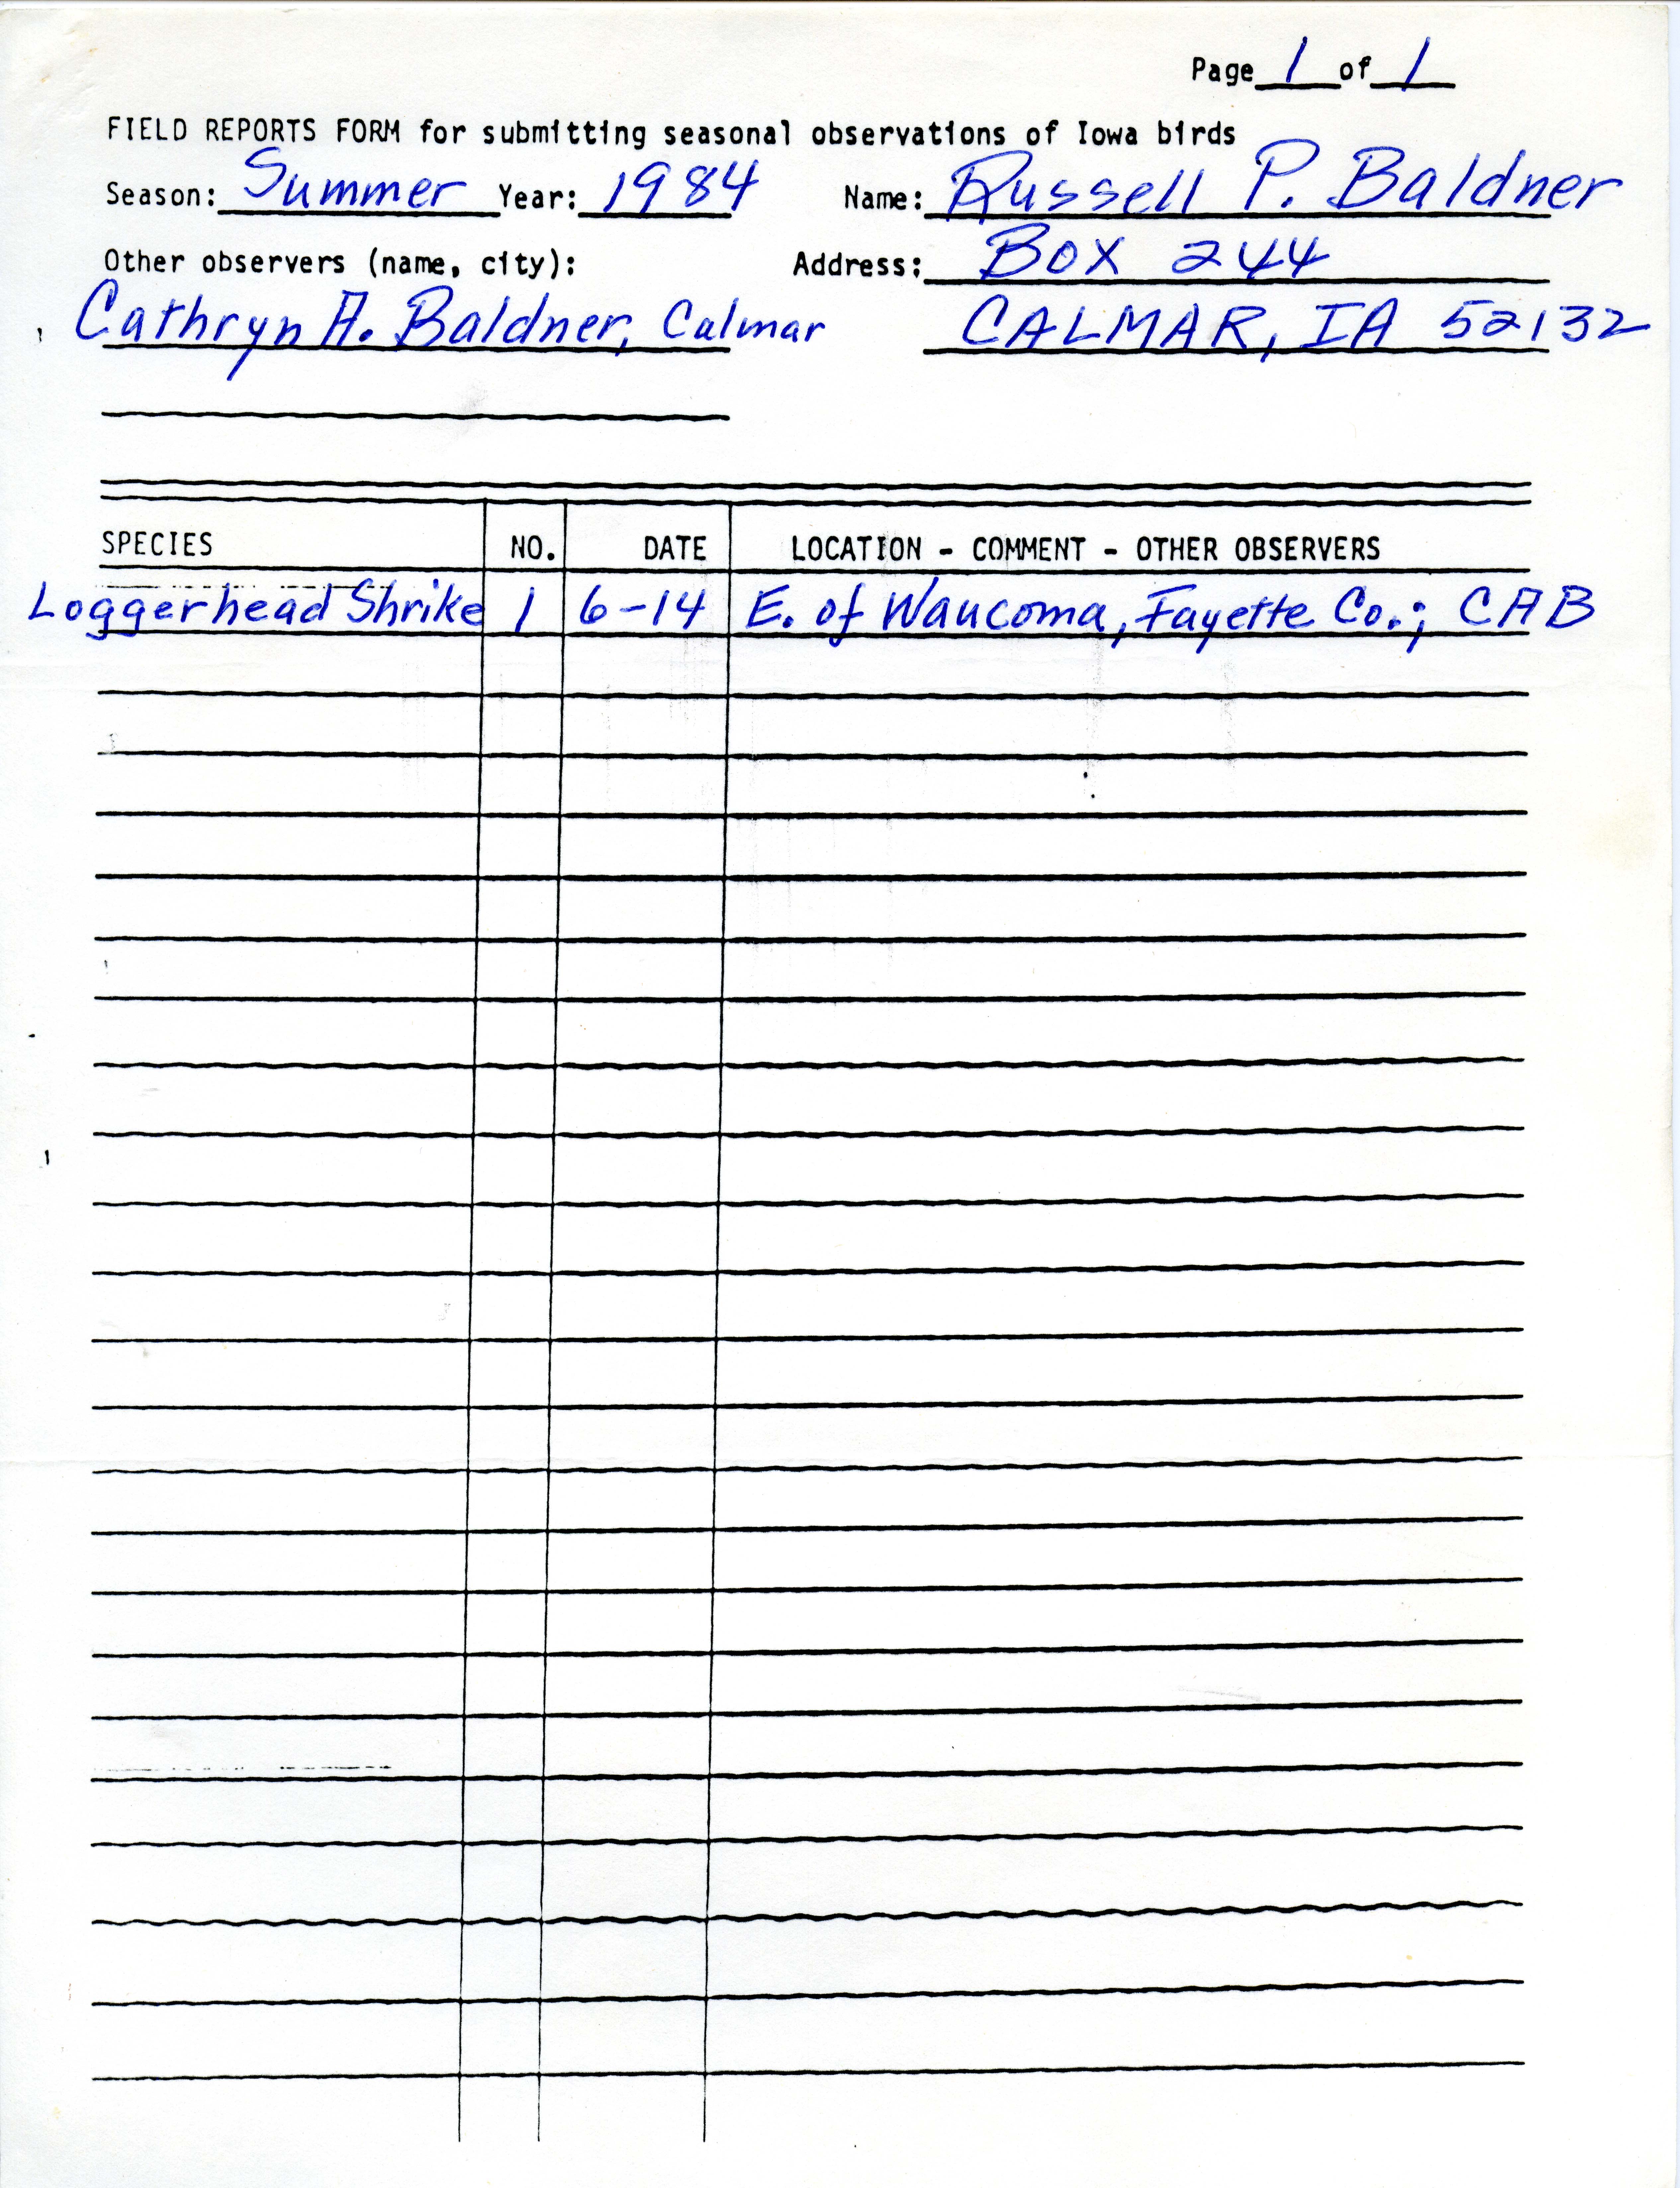 Field notes contributed by Russell P. Baldner, Calmar, Iowa, summer 1984